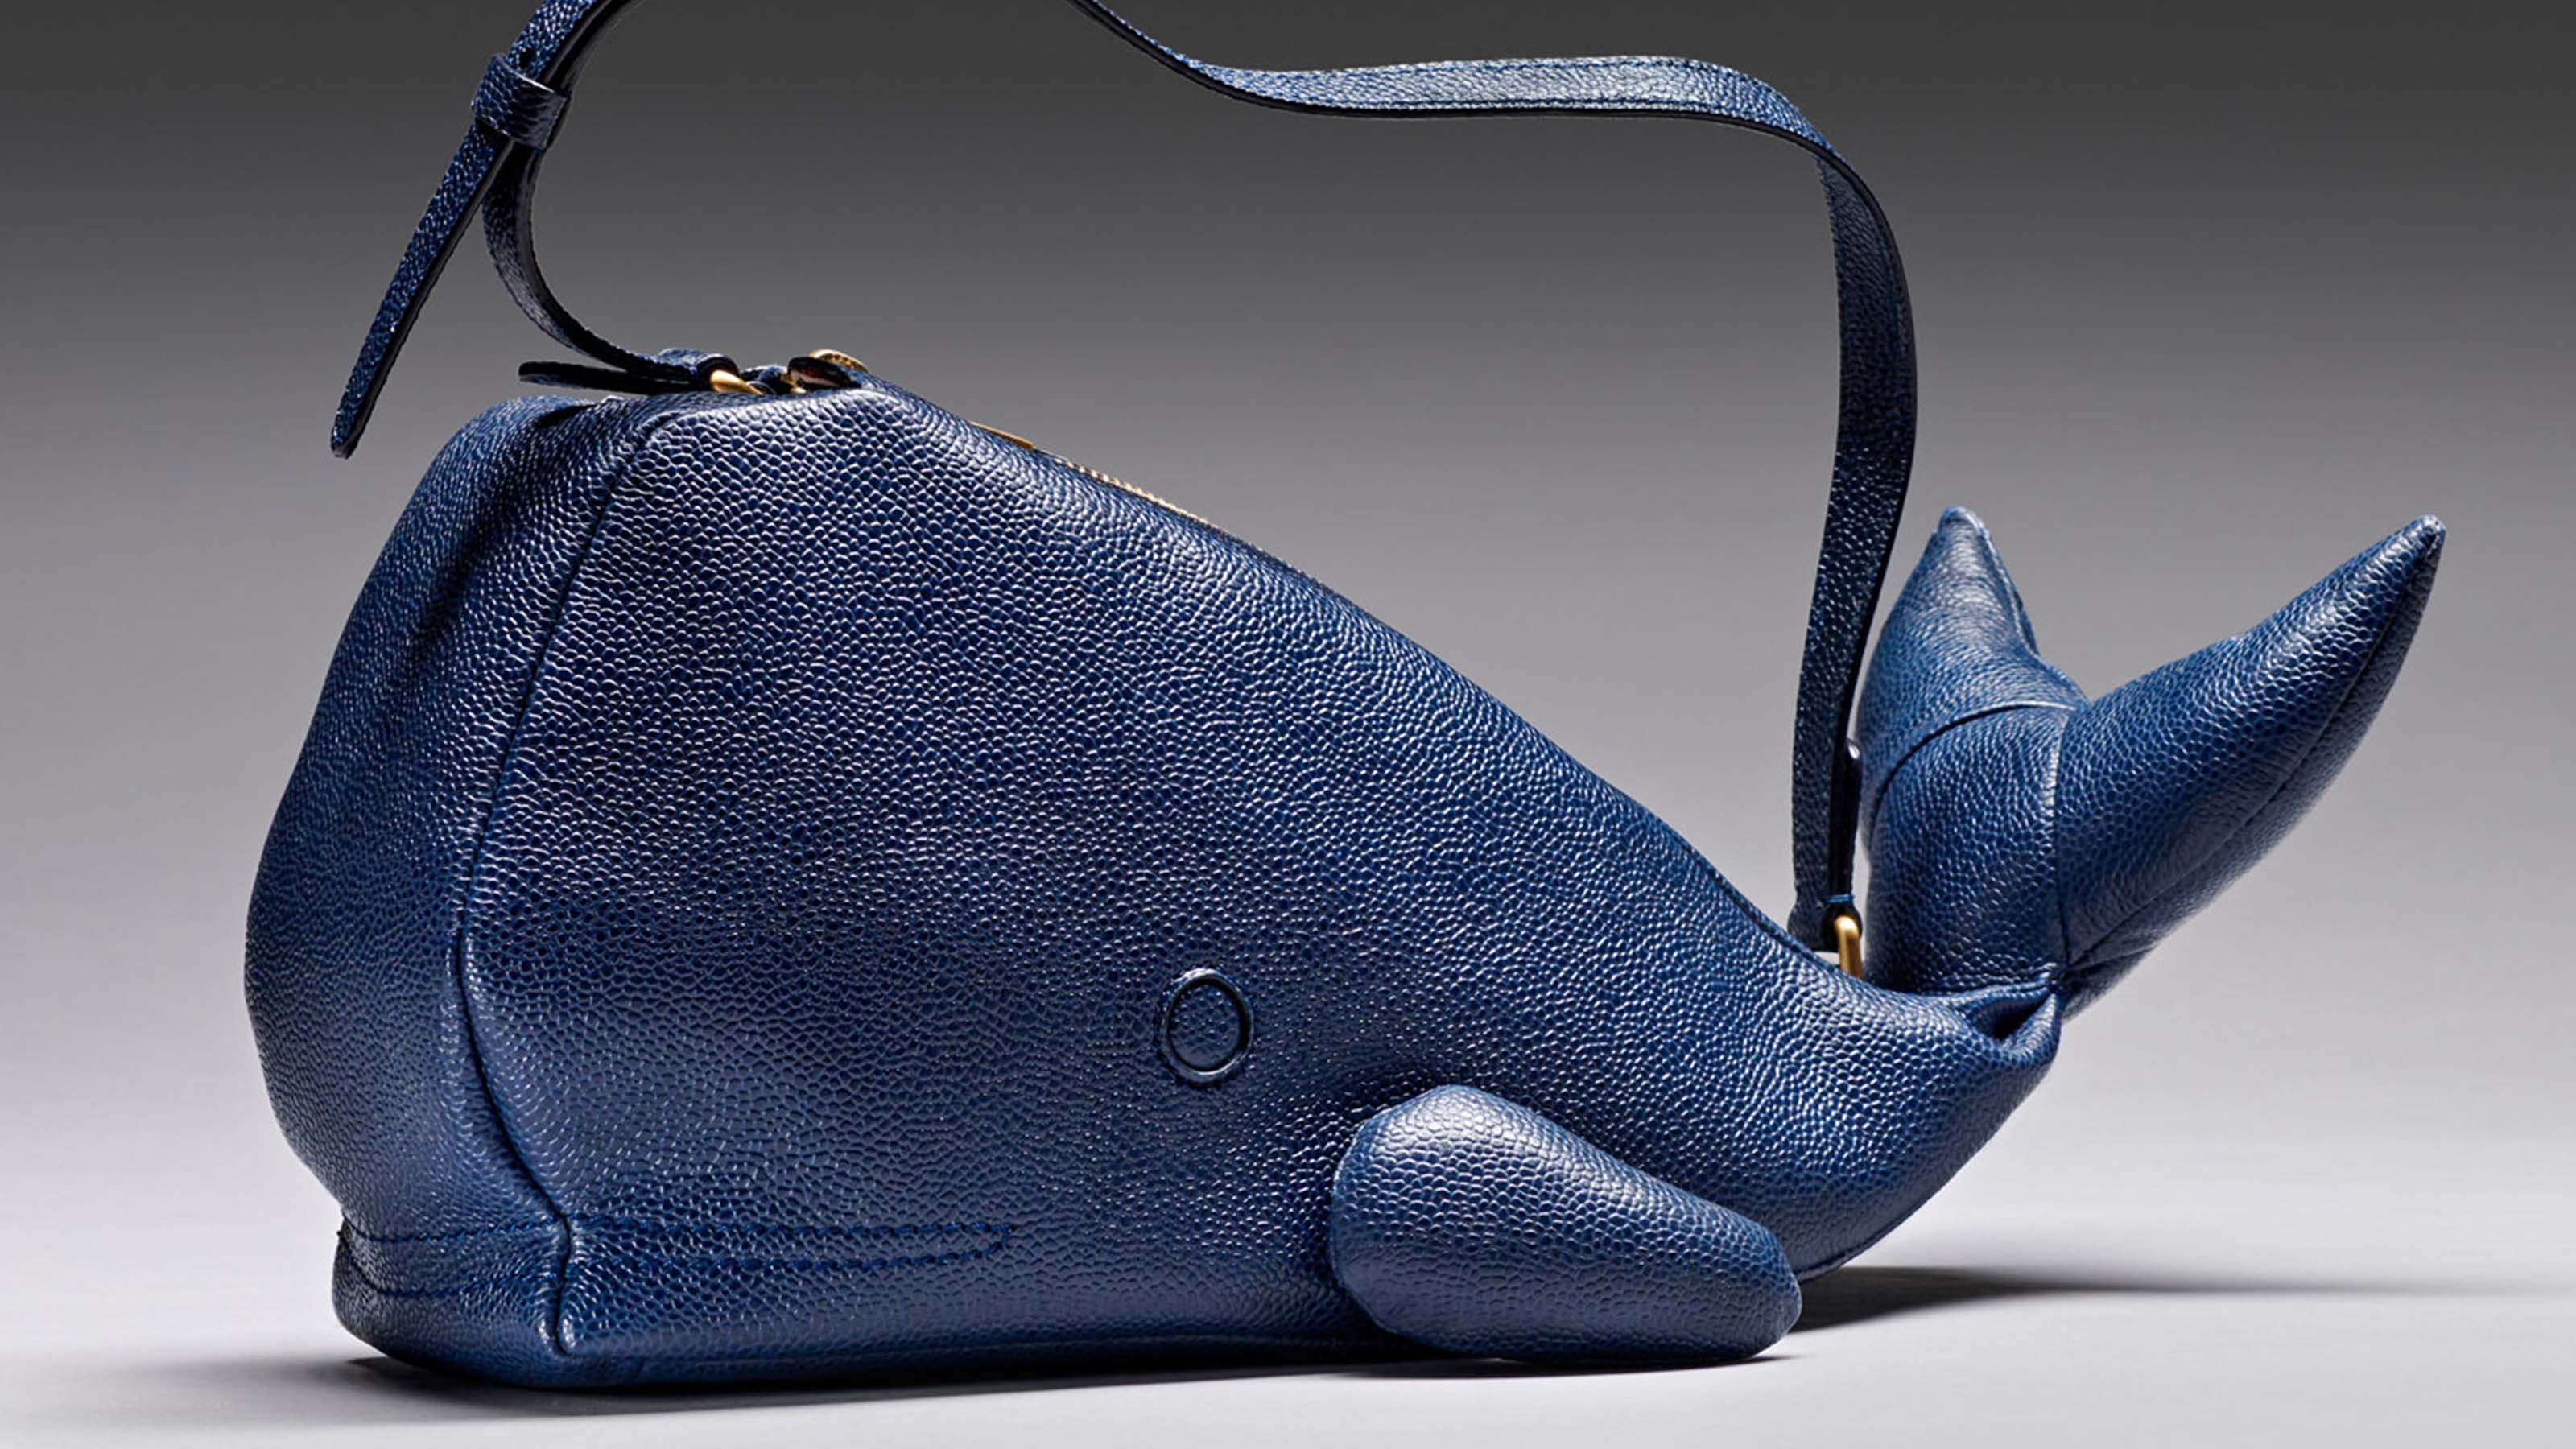 Thom Browne's whale-shaped bag is inspired by Moby Dick